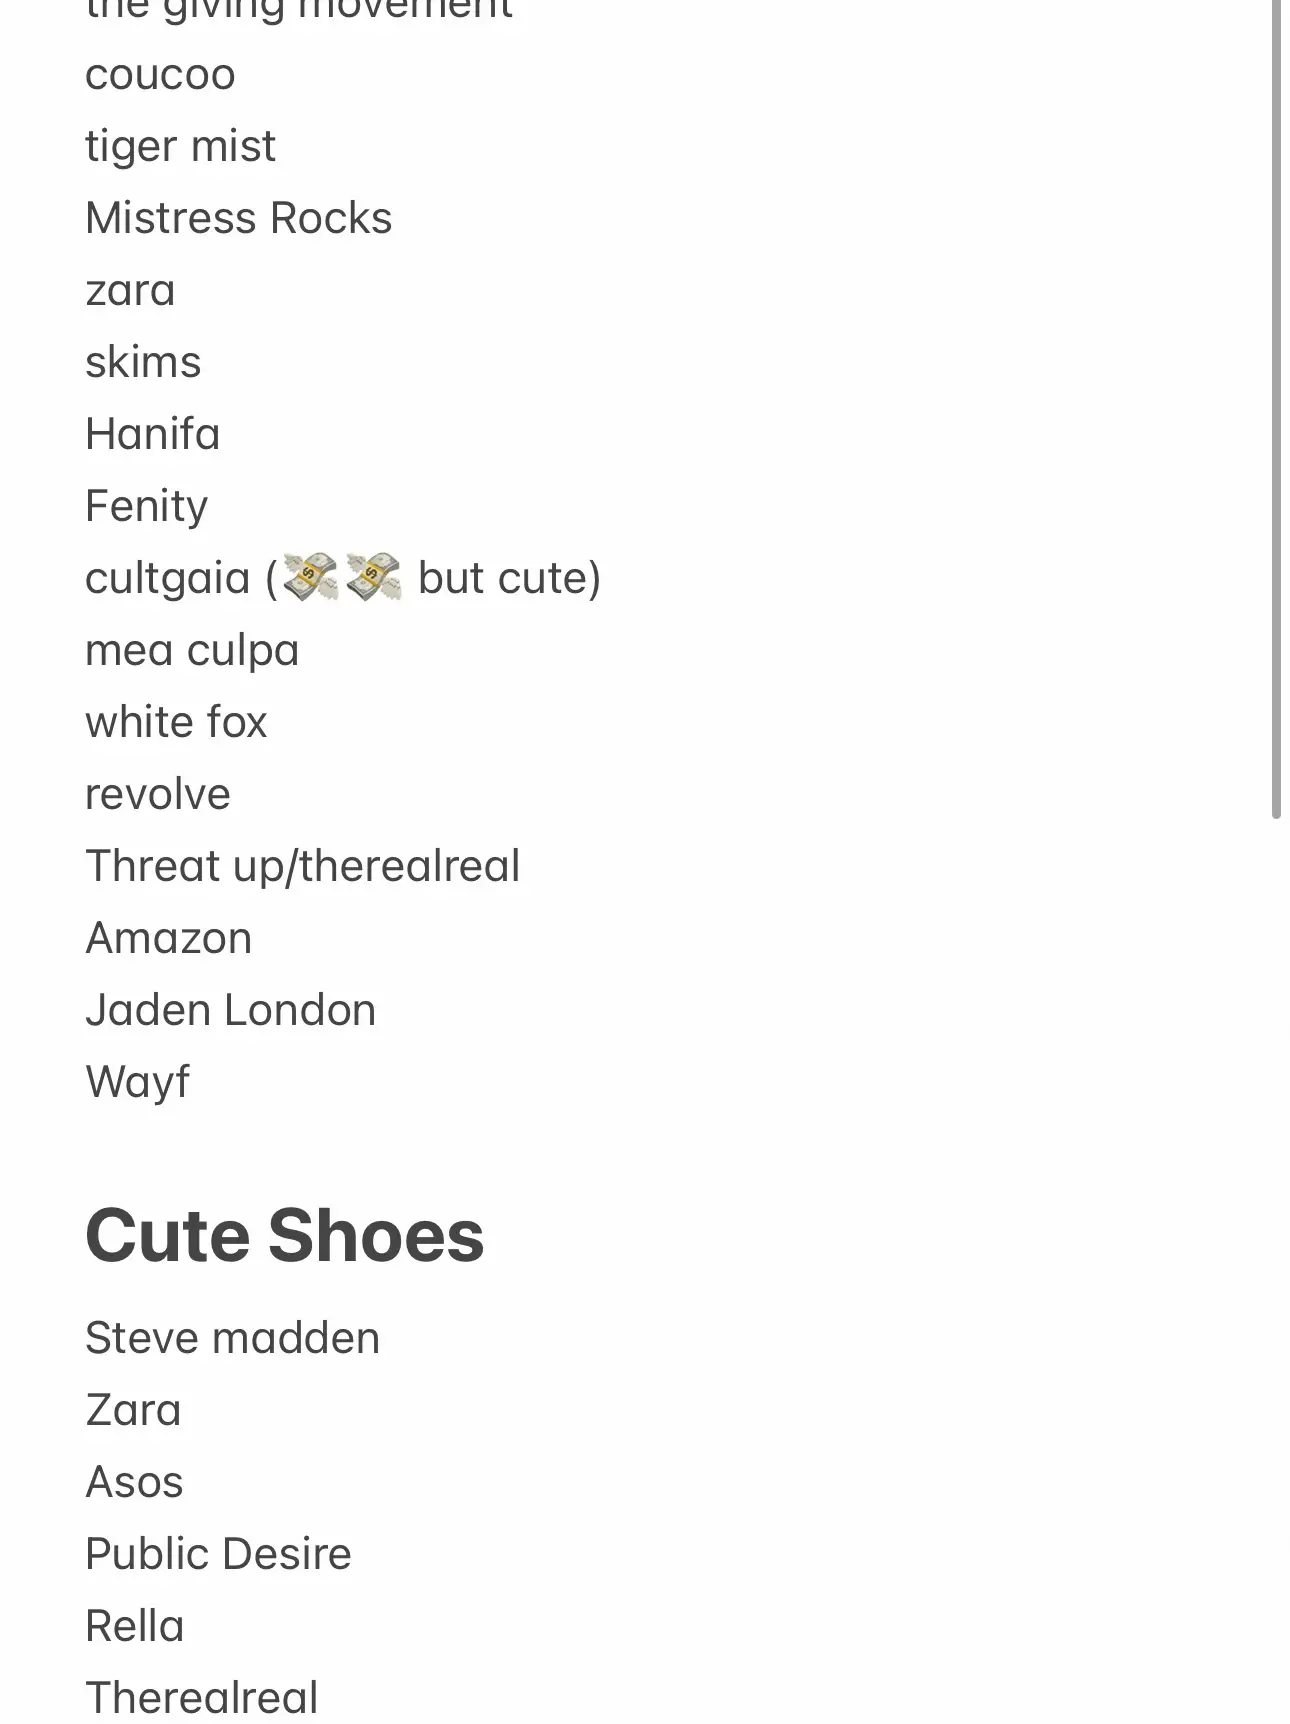  A list of shoes with a